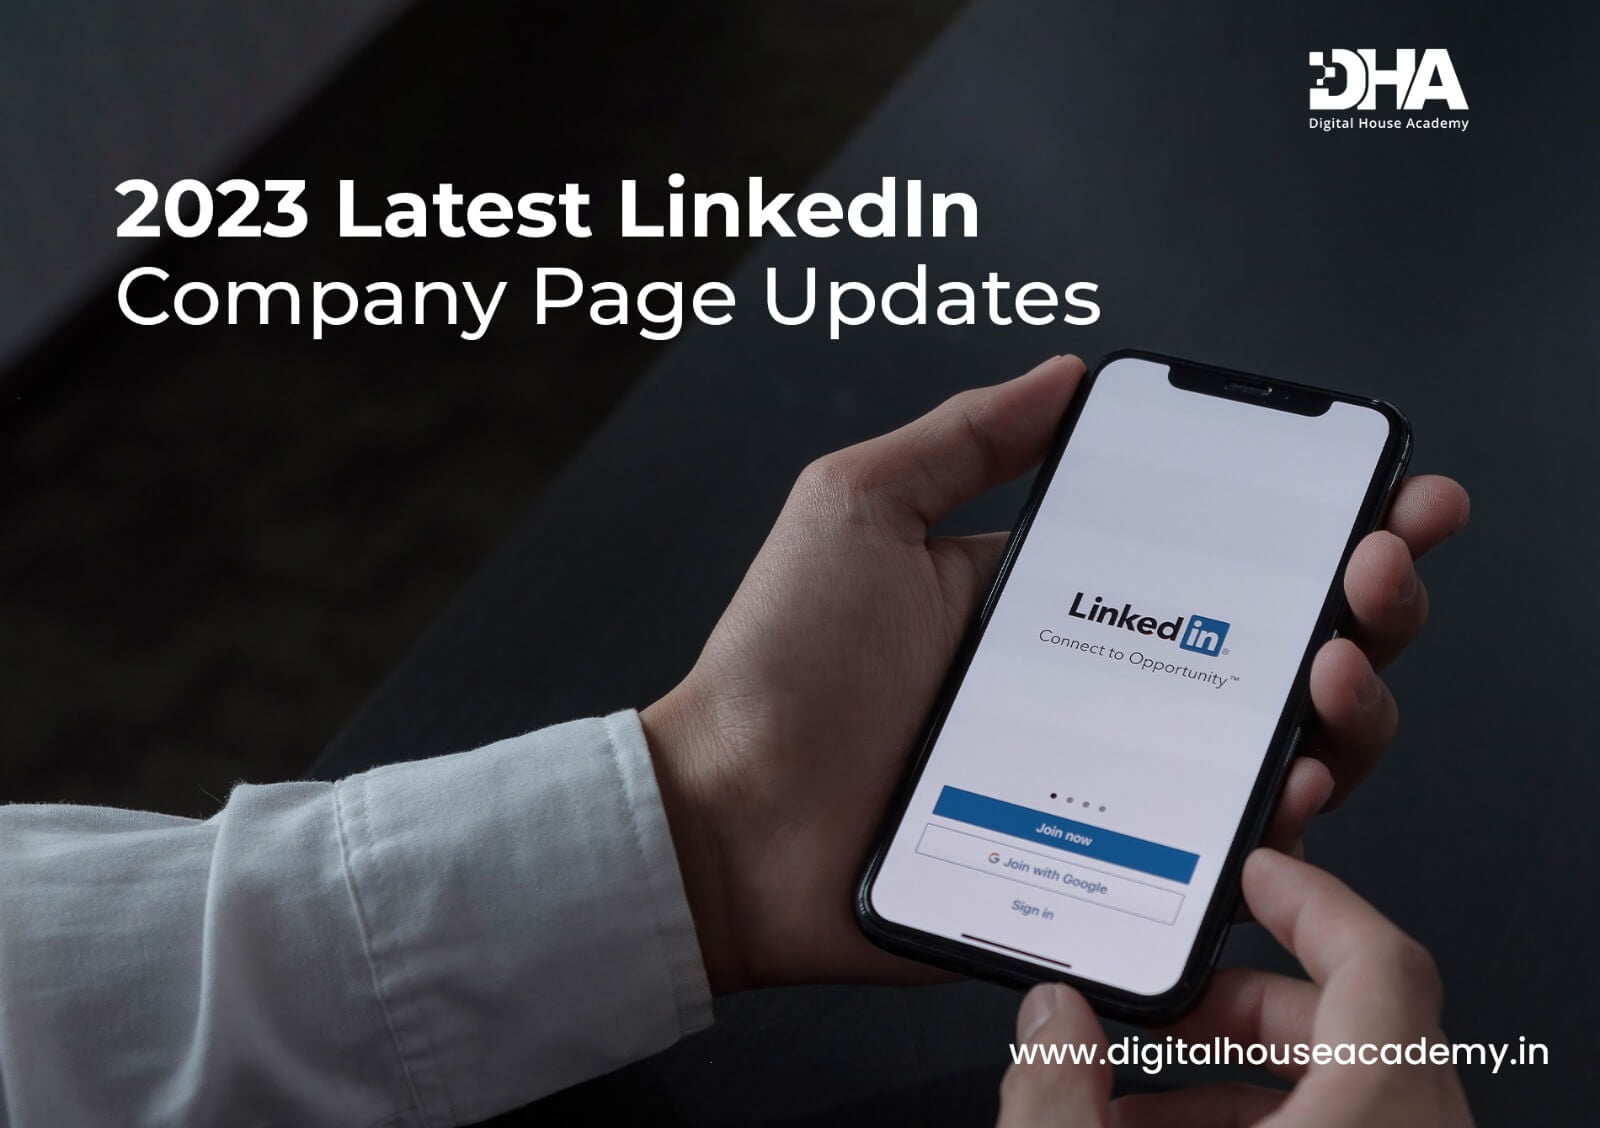 LinkedIn Company Page updates for 2023